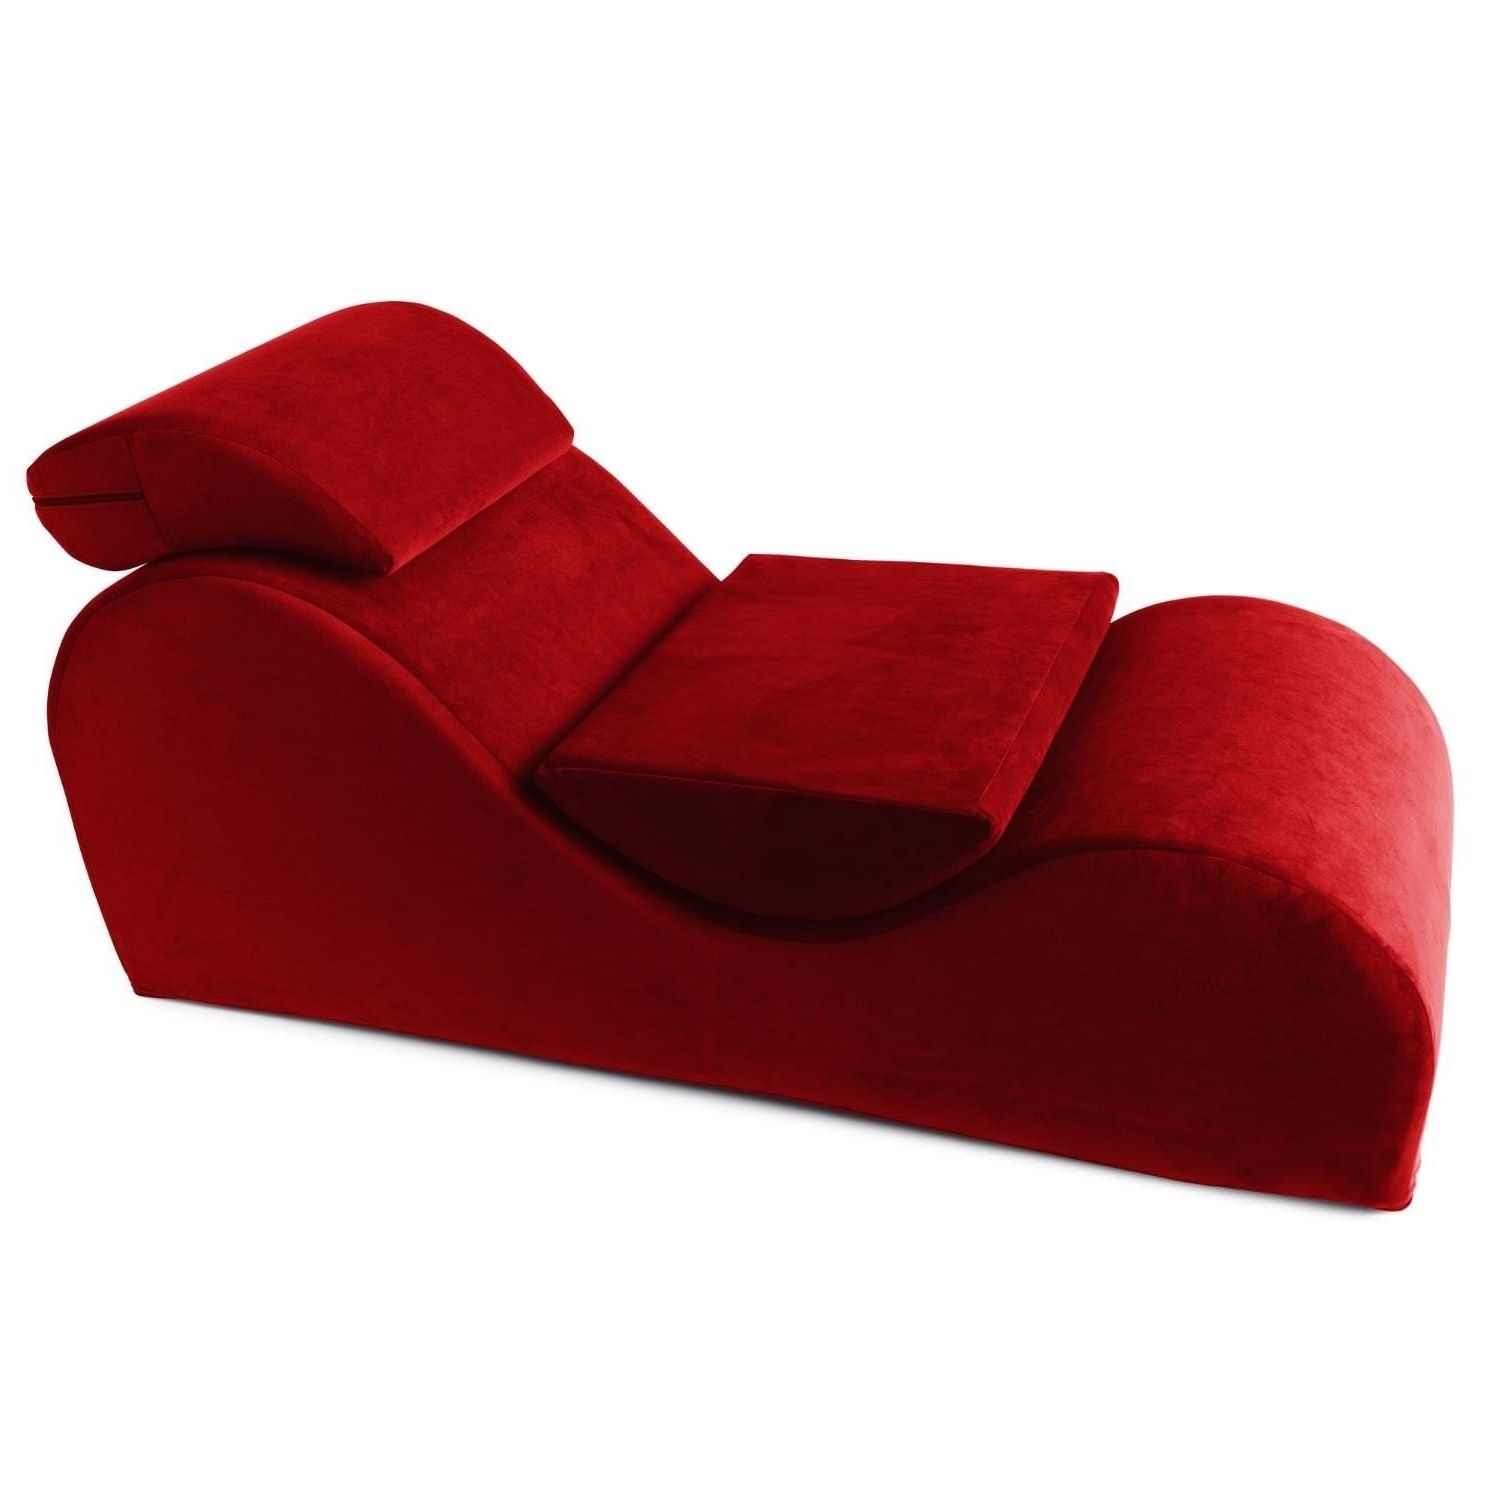 Famous Seduction Begins With Esse. This Luxury Chaise Provides Perfection For Esse Chaises (Photo 10 of 37)